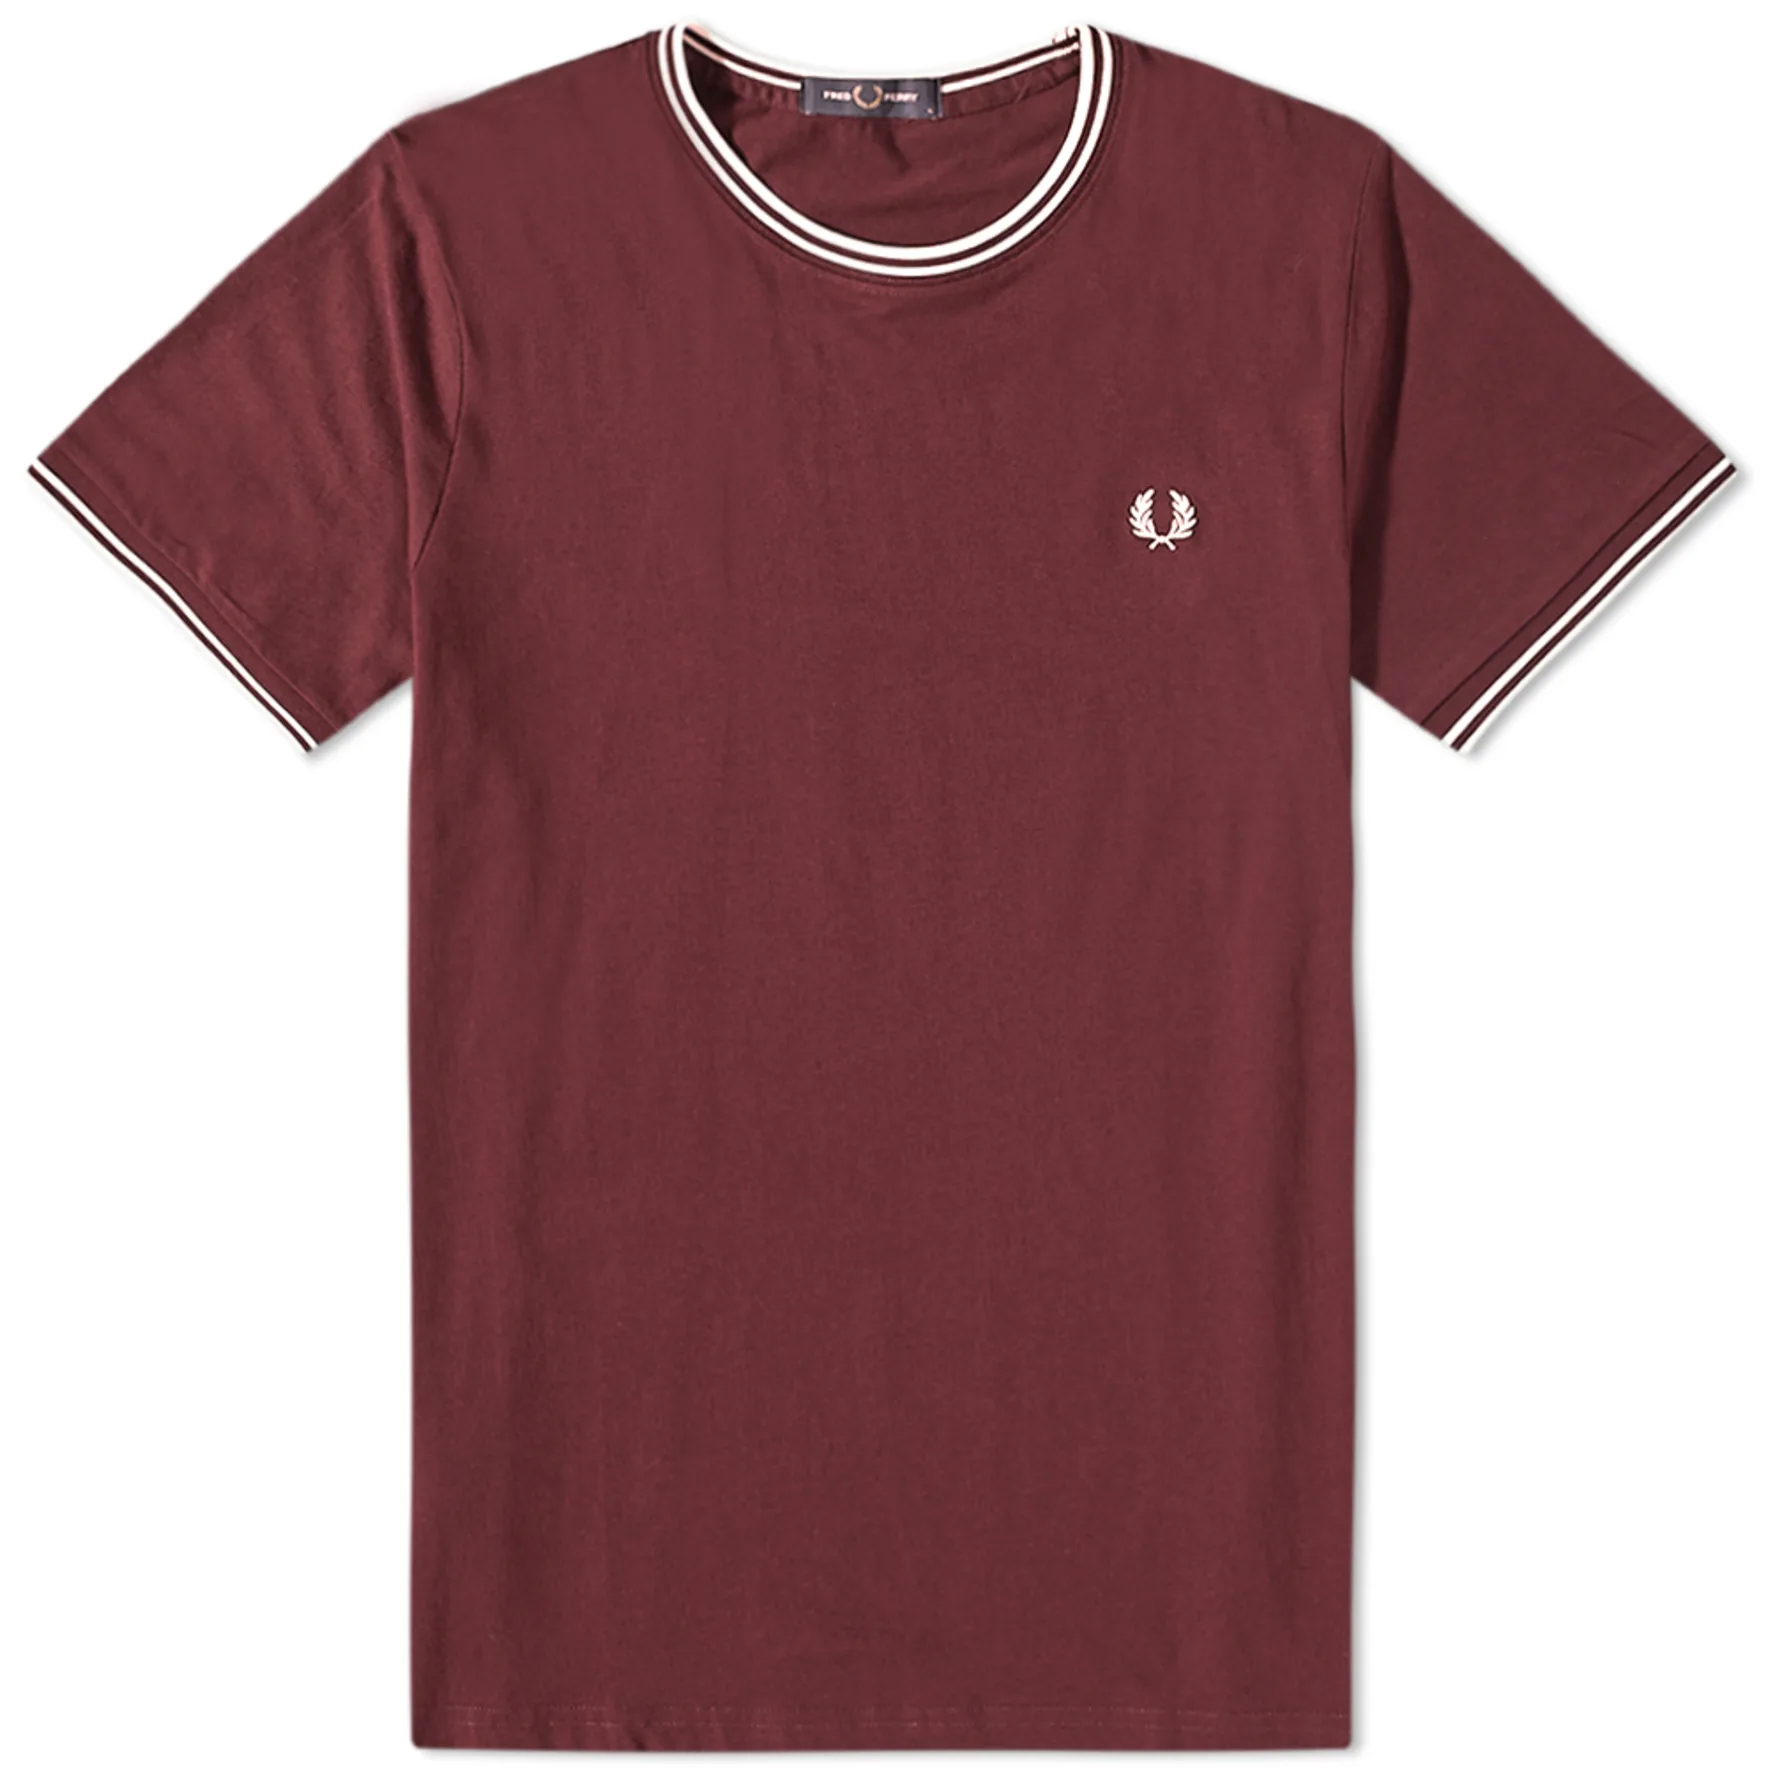 Футболка Fred Perry Authentic Twin Tipped, бордовый футболка fred perry long sleeve twin tipped tee